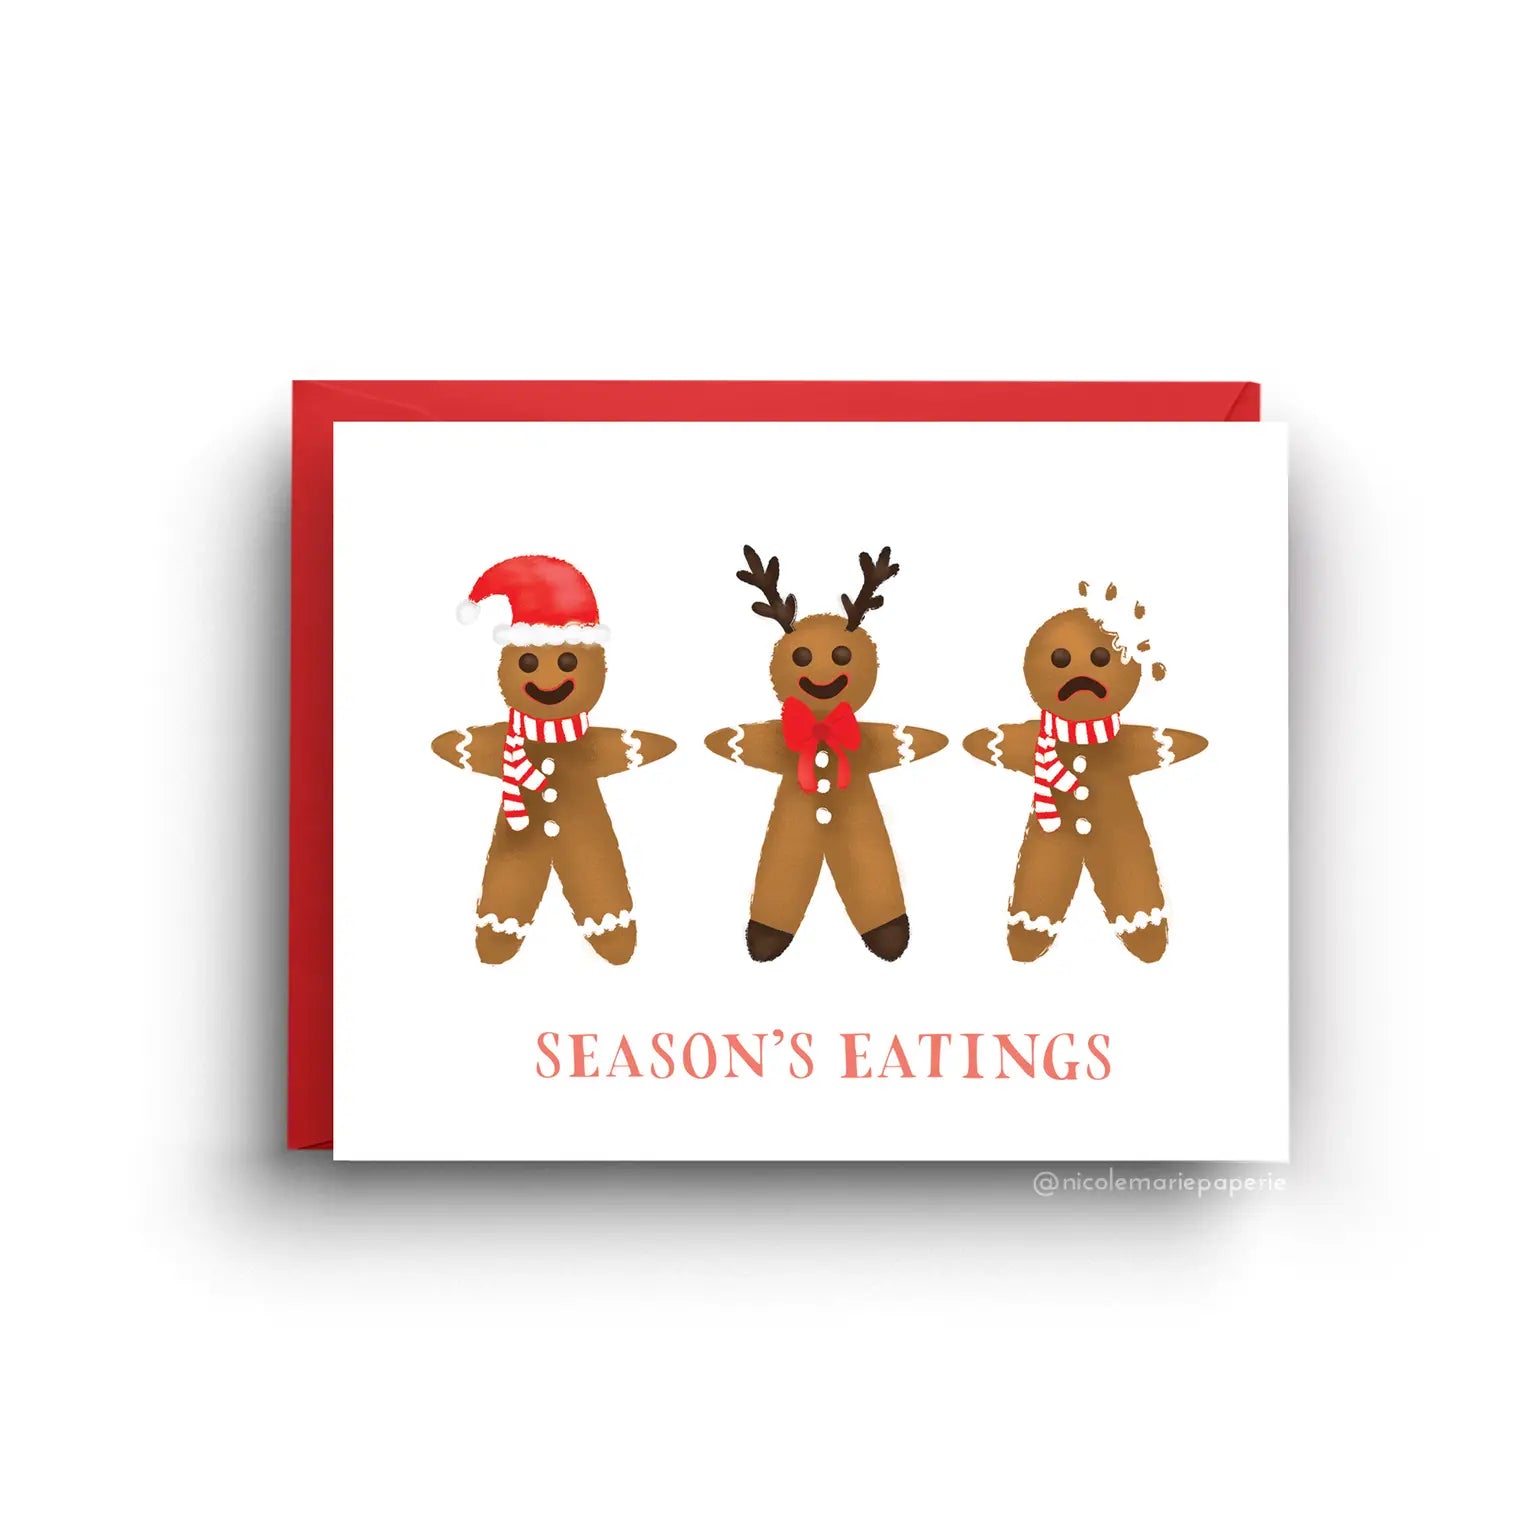 White card with three gingerbread cookies. Two are smiling and one is frowning with a bite taken out of its head. Orange text reads "season's eatings" 